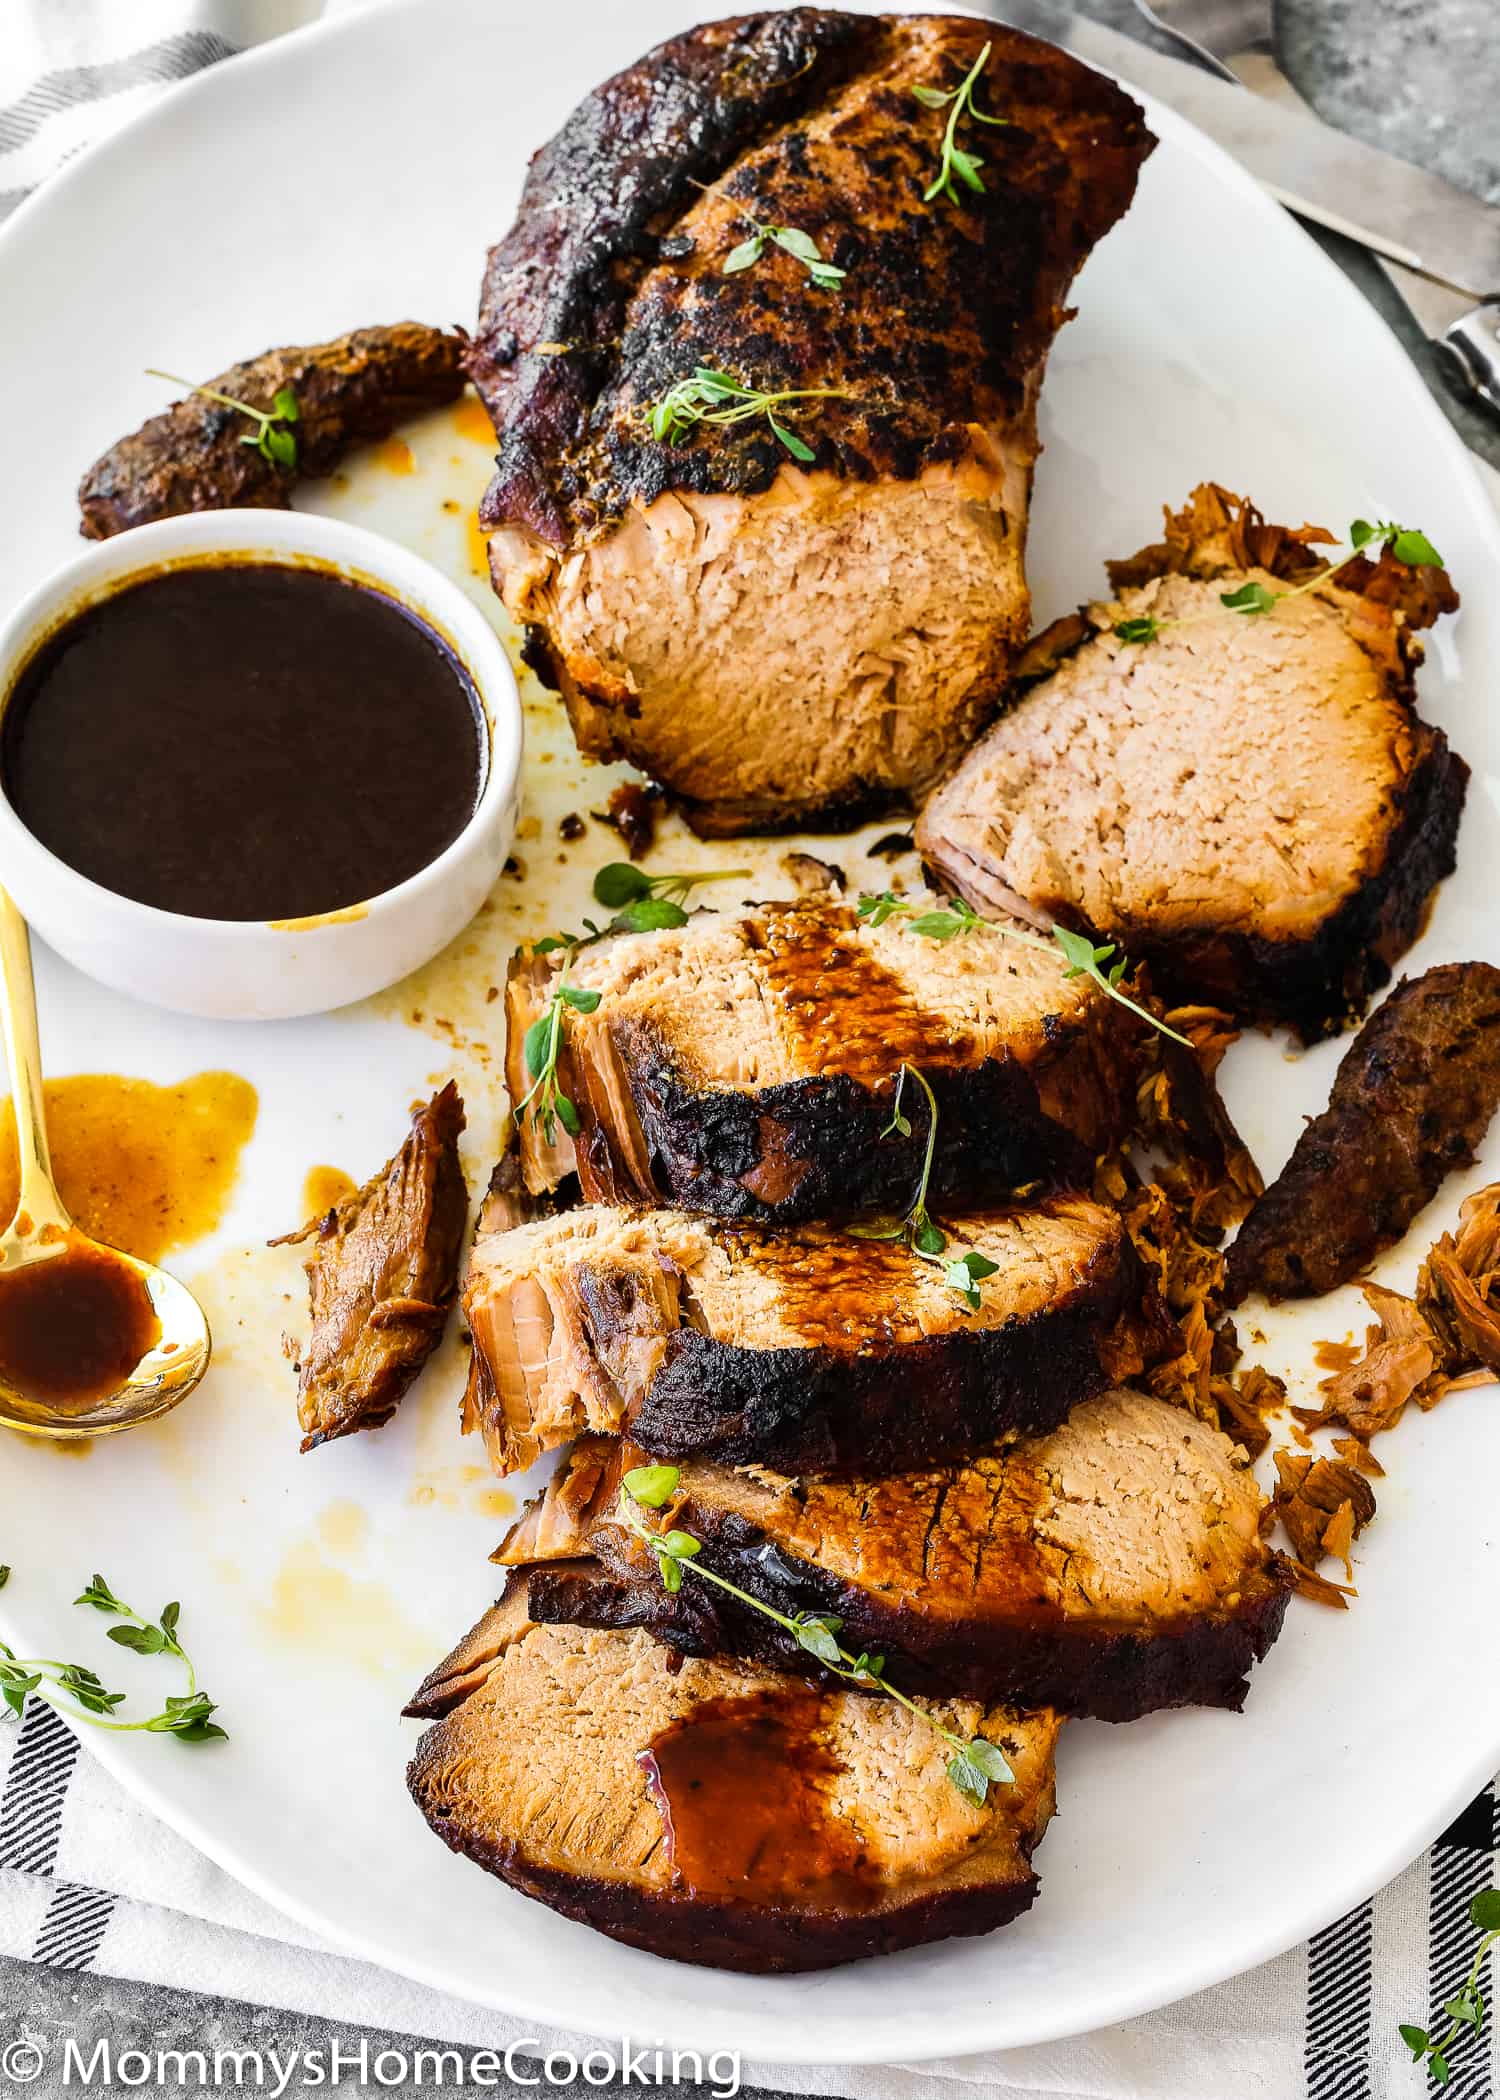 This Slow Cooker Honey Balsamic Pork Loin is tender, juicy and fall-apart delicious! Smothered in a rich honey balsamic sauce, this pork loin is easy for weeknight dinner yet fancy, elegant and impressive enough for company. https://mommyshomecooking.com